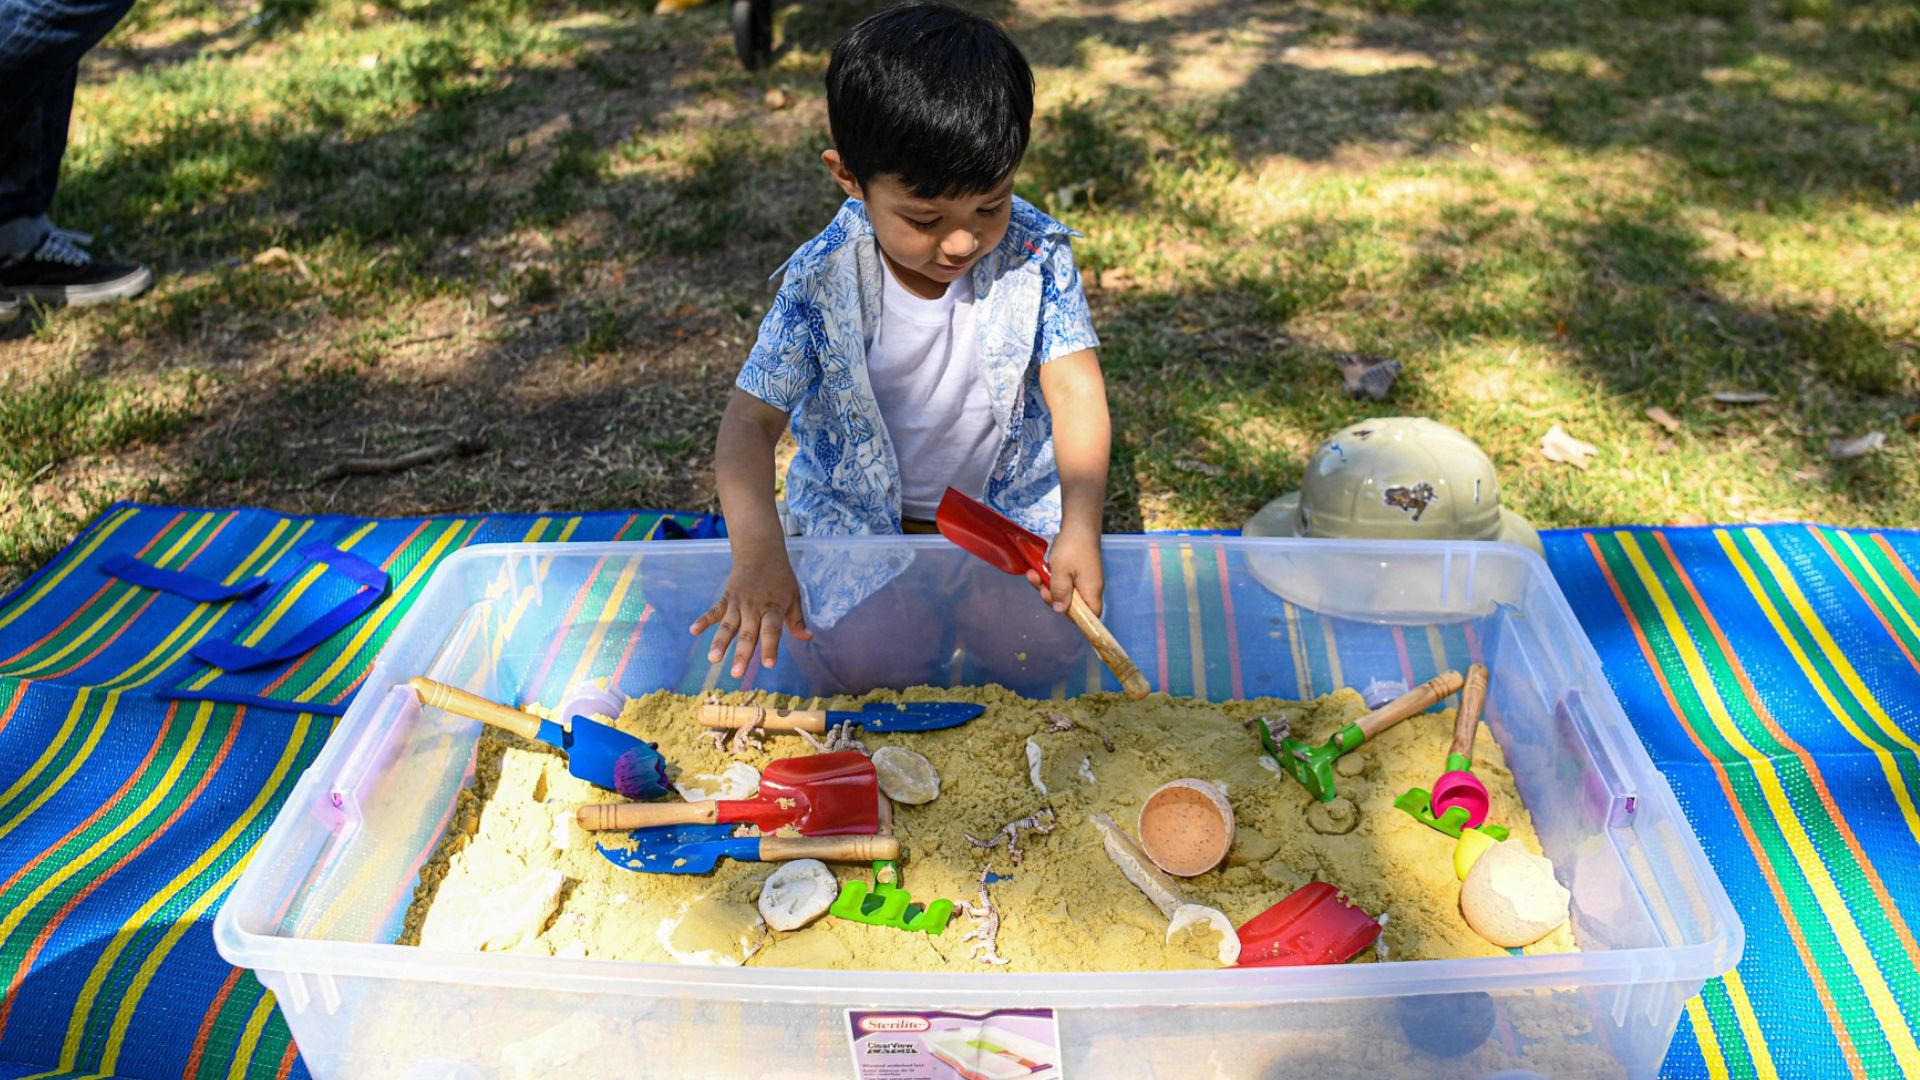 A 5 year old boy playing in a sandbox outside in the park.